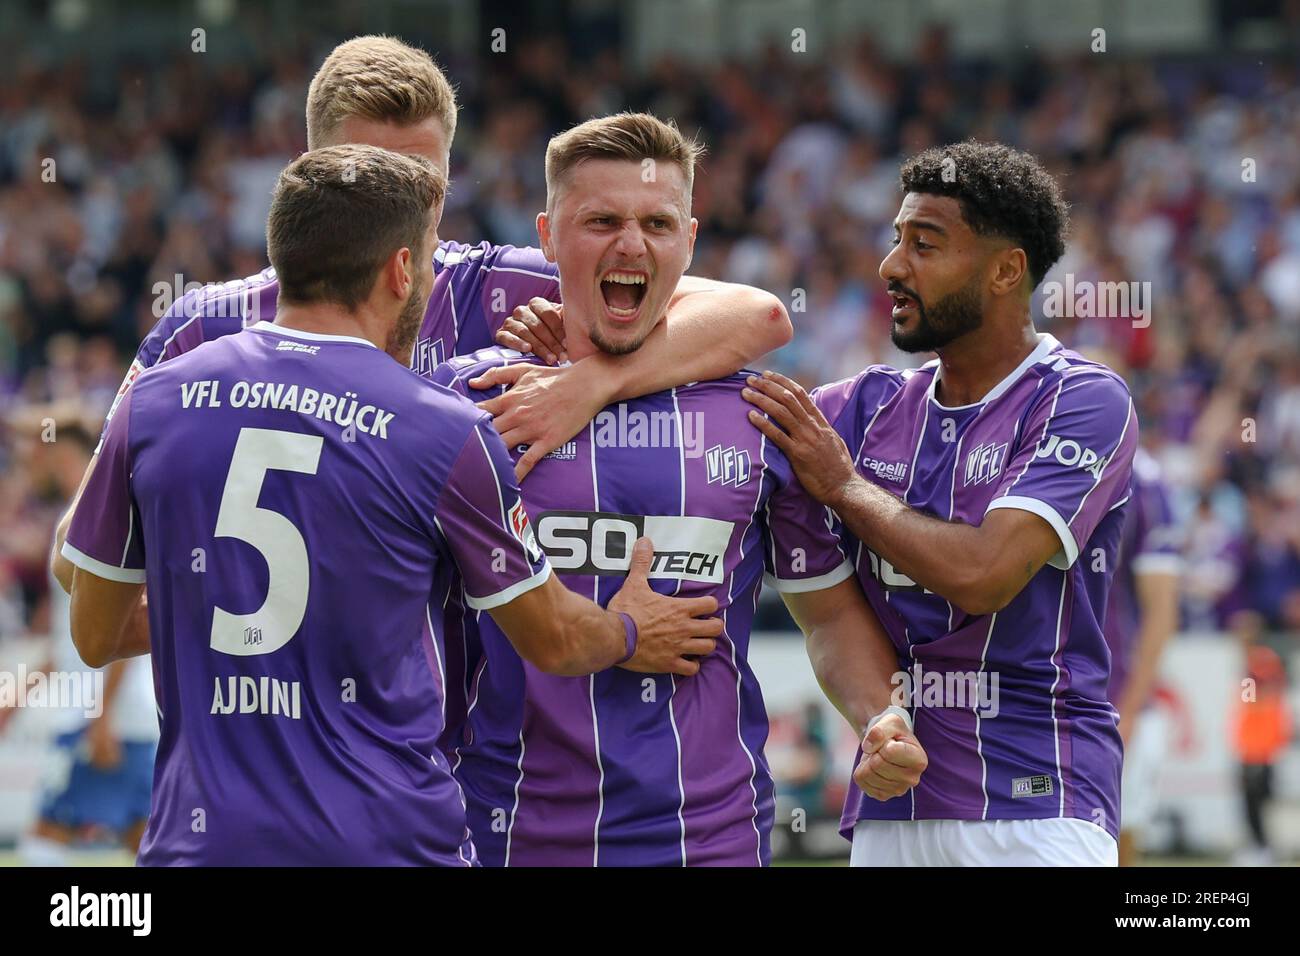 29 July 2023, Lower Saxony, Osnabrück: Soccer: 2nd Bundesliga, VfL Osnabrück - Karlsruher SC, Matchday 1 at Stadion an der Bremer Brücke. Osnabrück's goal scorer Erik Engelhardt (2nd from right) celebrates his goal to make it 1:1 with Bashkim Ajdini (l-r), Lukas Kunze and Noel Niemann. Photo: Friso Gentsch/dpa - IMPORTANT NOTE: In accordance with the requirements of the DFL Deutsche Fußball Liga and the DFB Deutscher Fußball-Bund, it is prohibited to use or have used photographs taken in the stadium and/or of the match in the form of sequence pictures and/or video-like photo series. Stock Photo